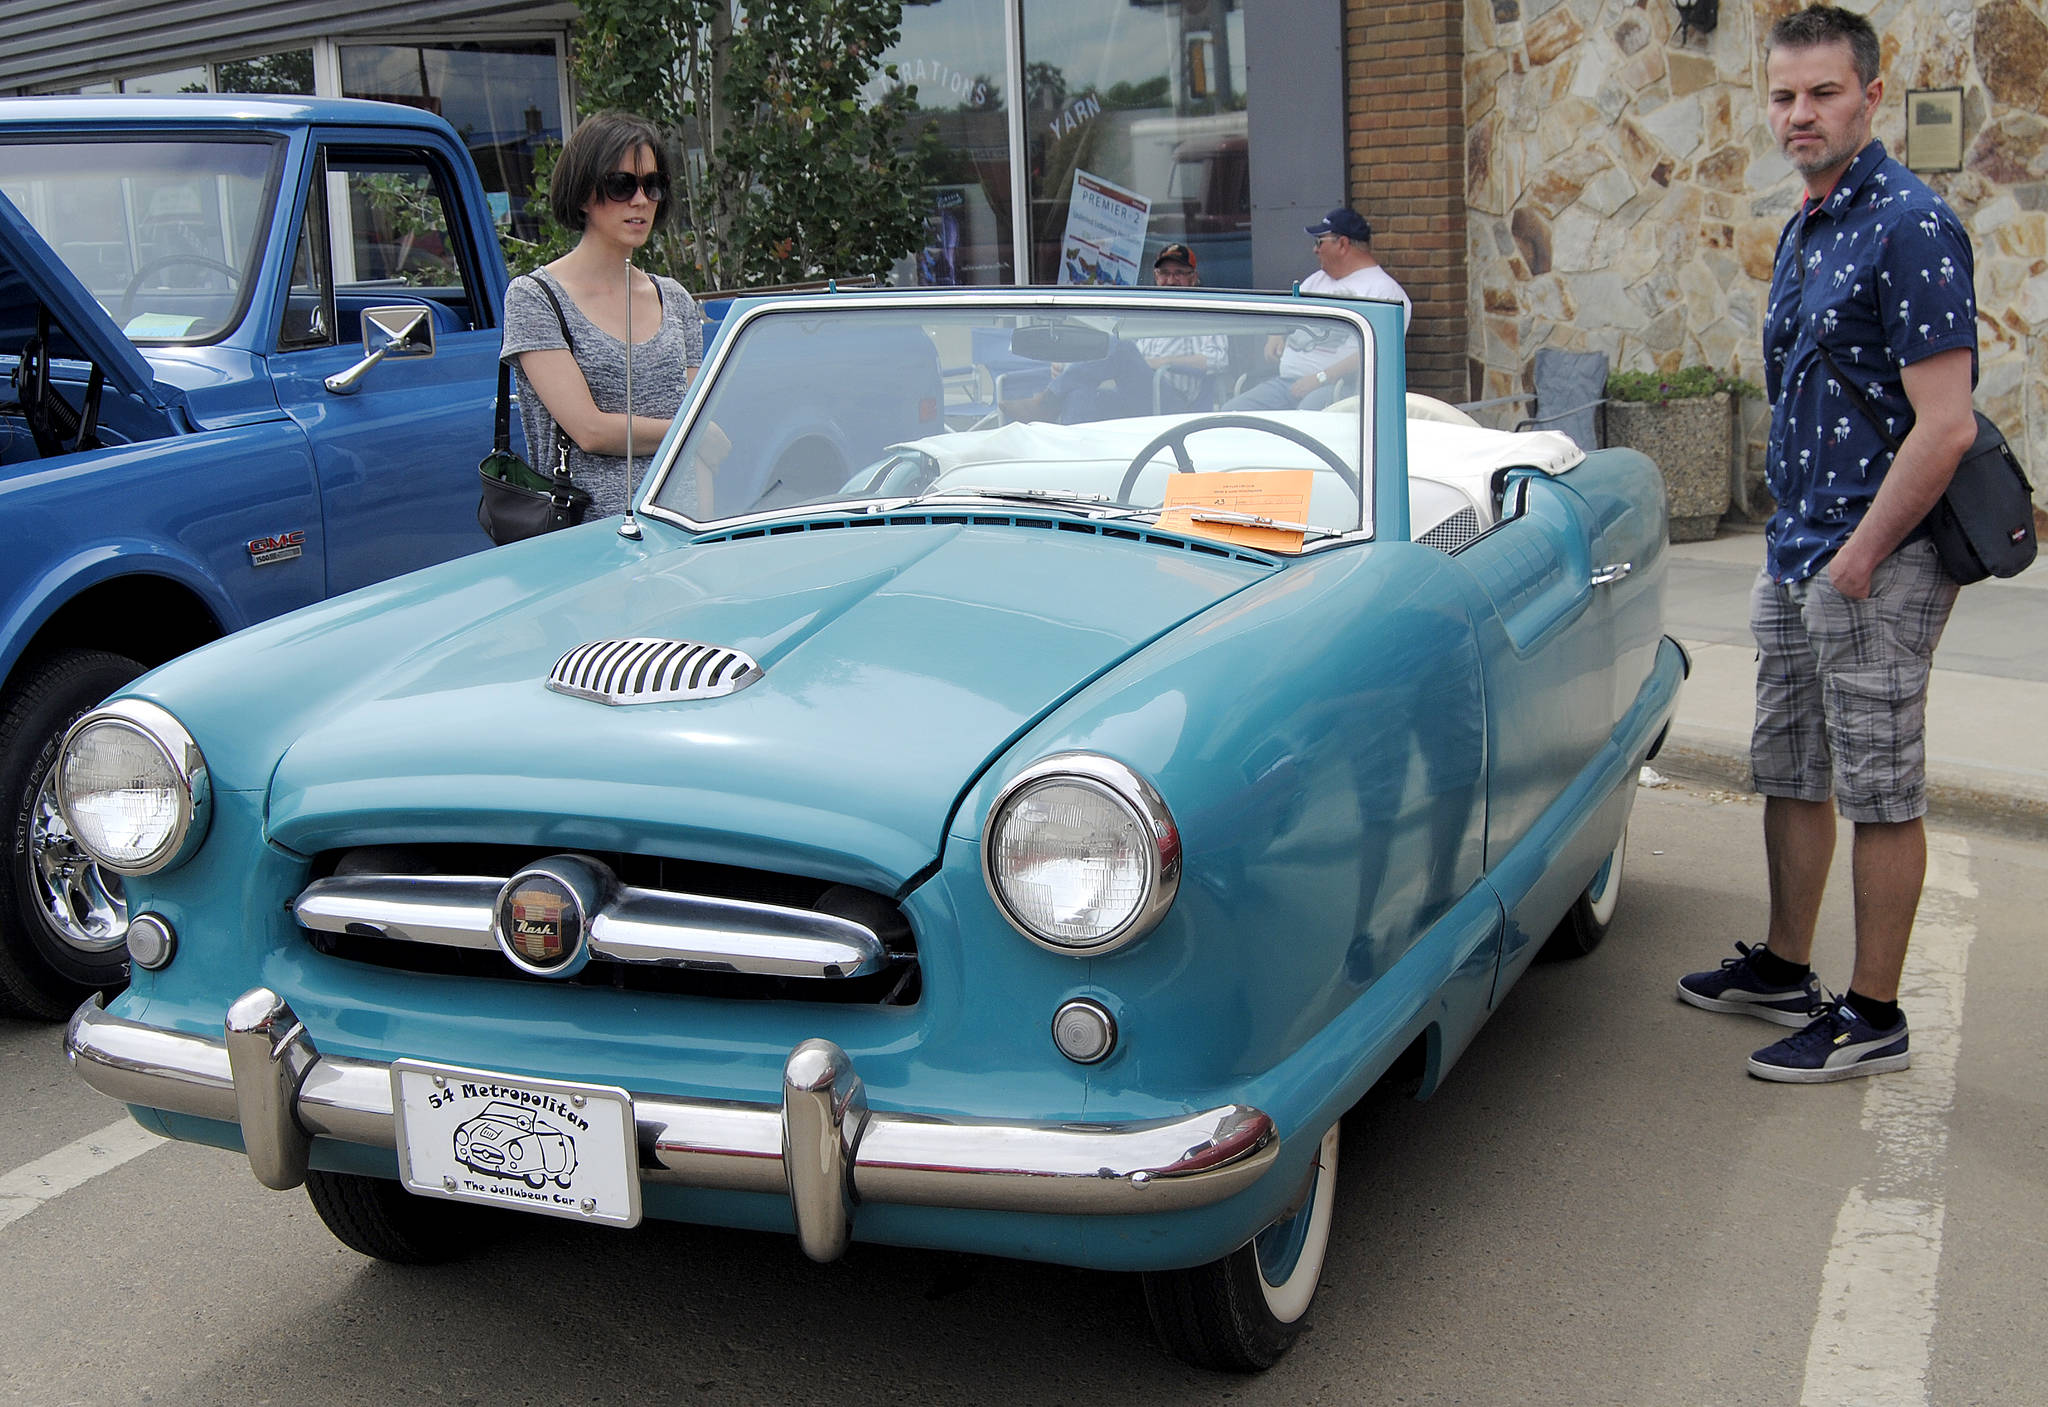 Vladimir Rancic and Jezebel Polegato check out this 1954 car during Stettler’s car show on main street June 9. The couple came from Italy and are residing in Edmonton. They happened to drive through Stettler Saturday and noticed the car show. (Lisa Joy/Stettler Independent)